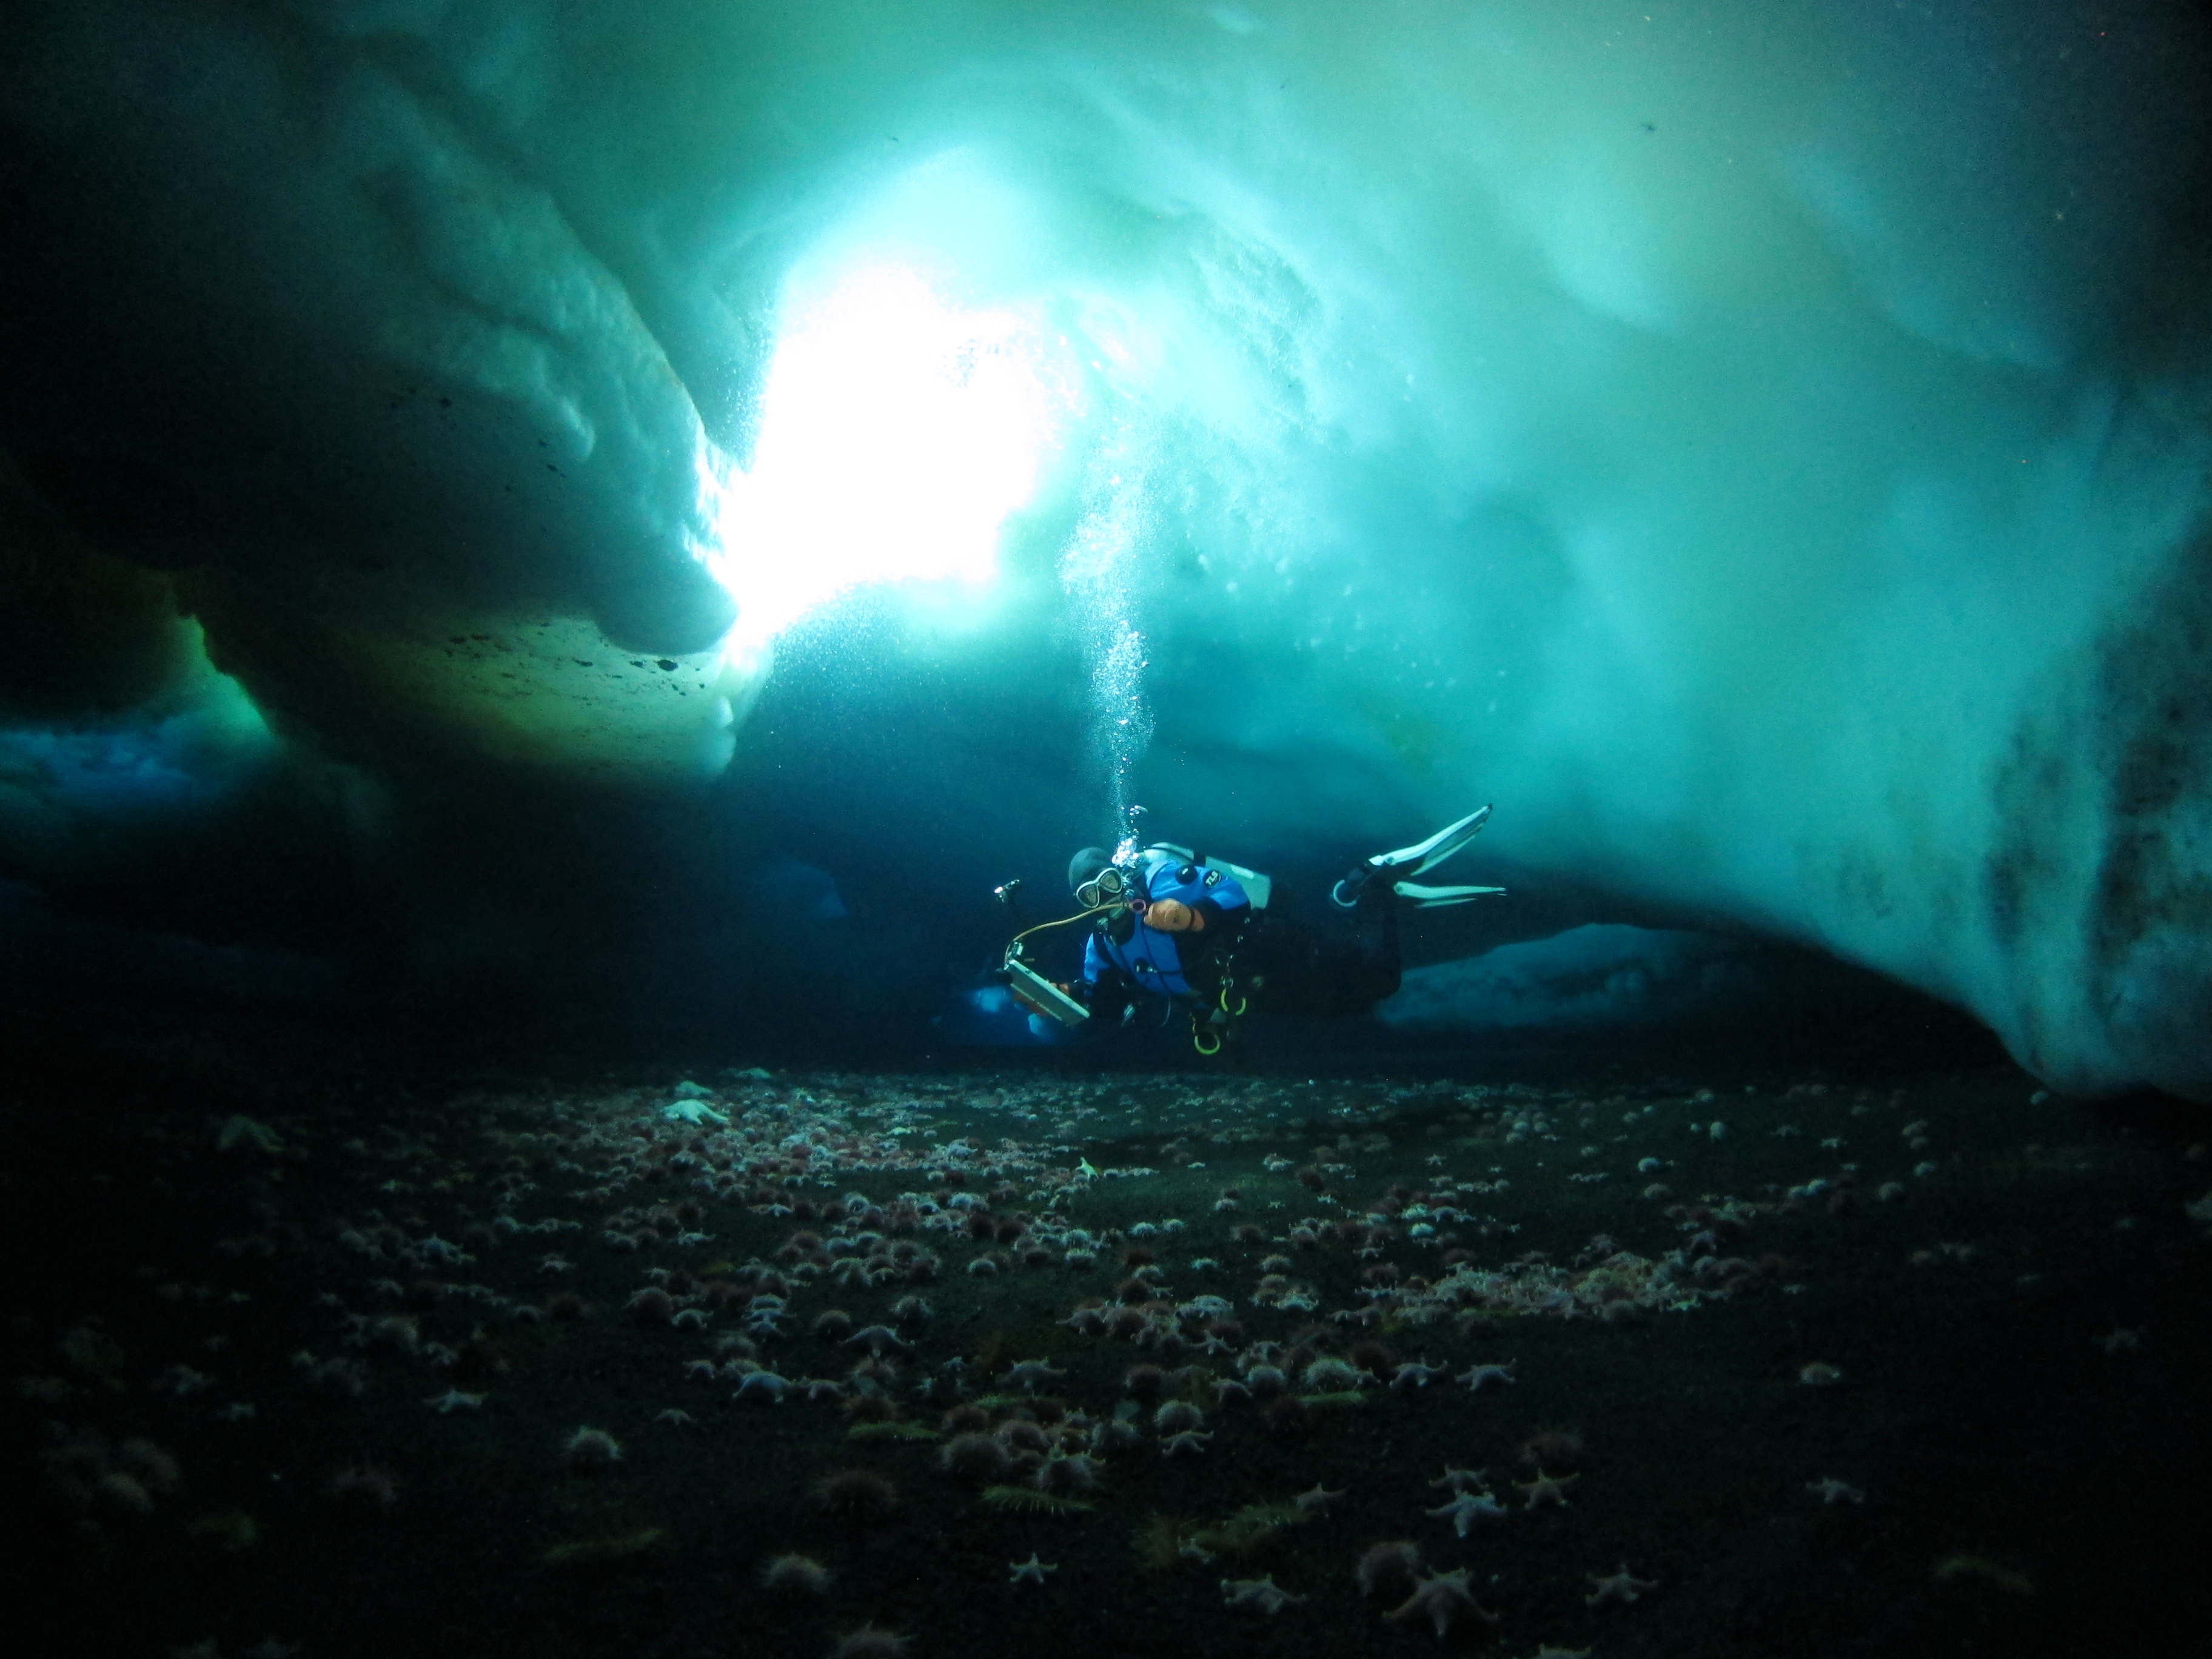 A diver with an art slate, under the water and in ice caves, near the ocean floor.